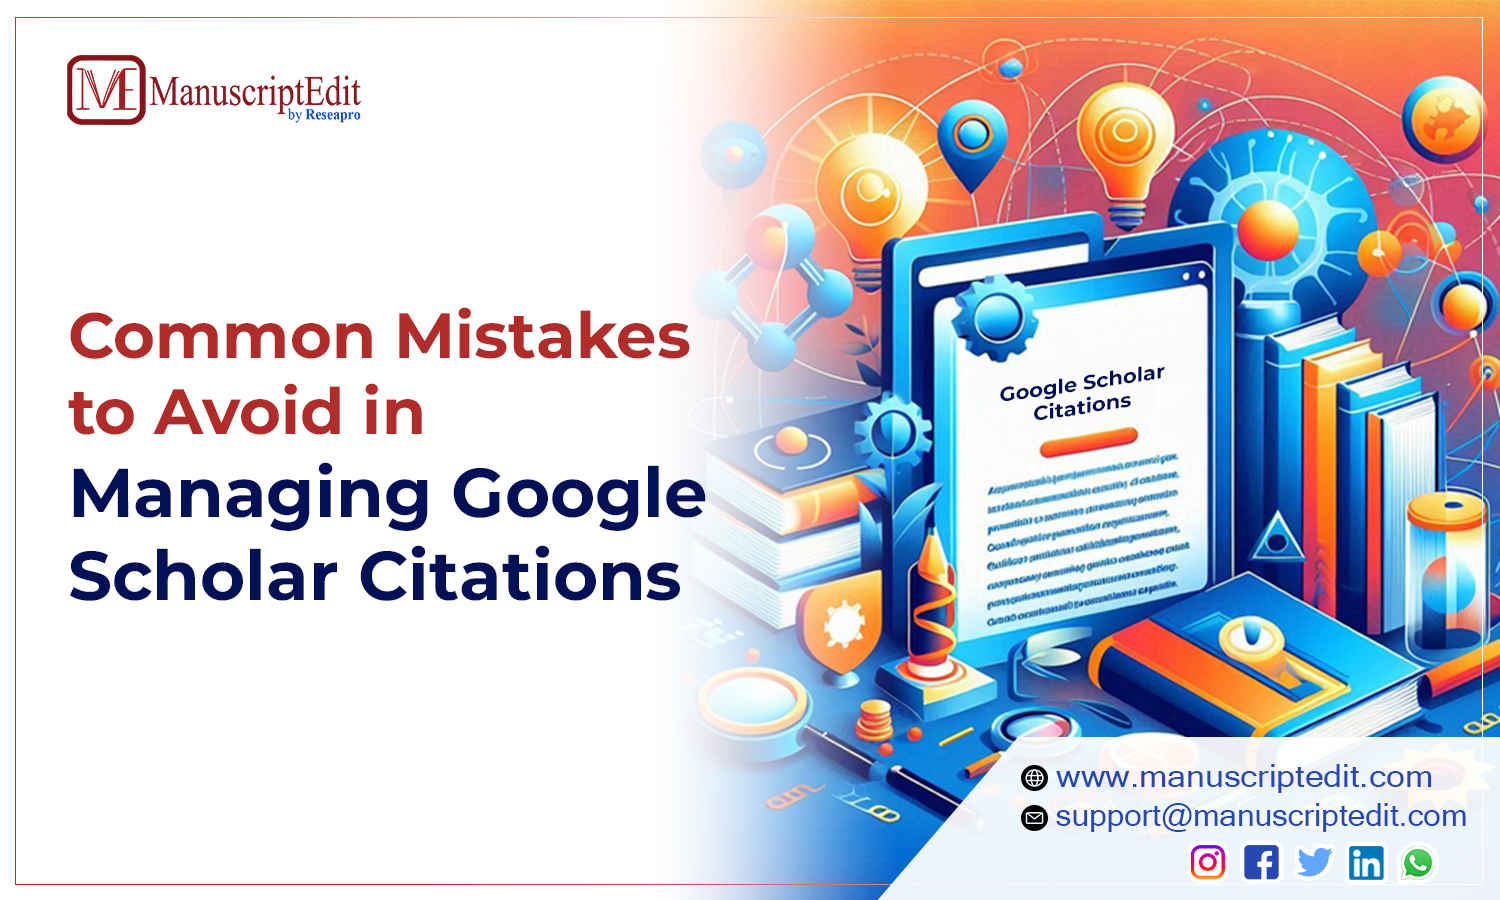 Common Mistakes to Avoid in Managing Google Scholar Citations